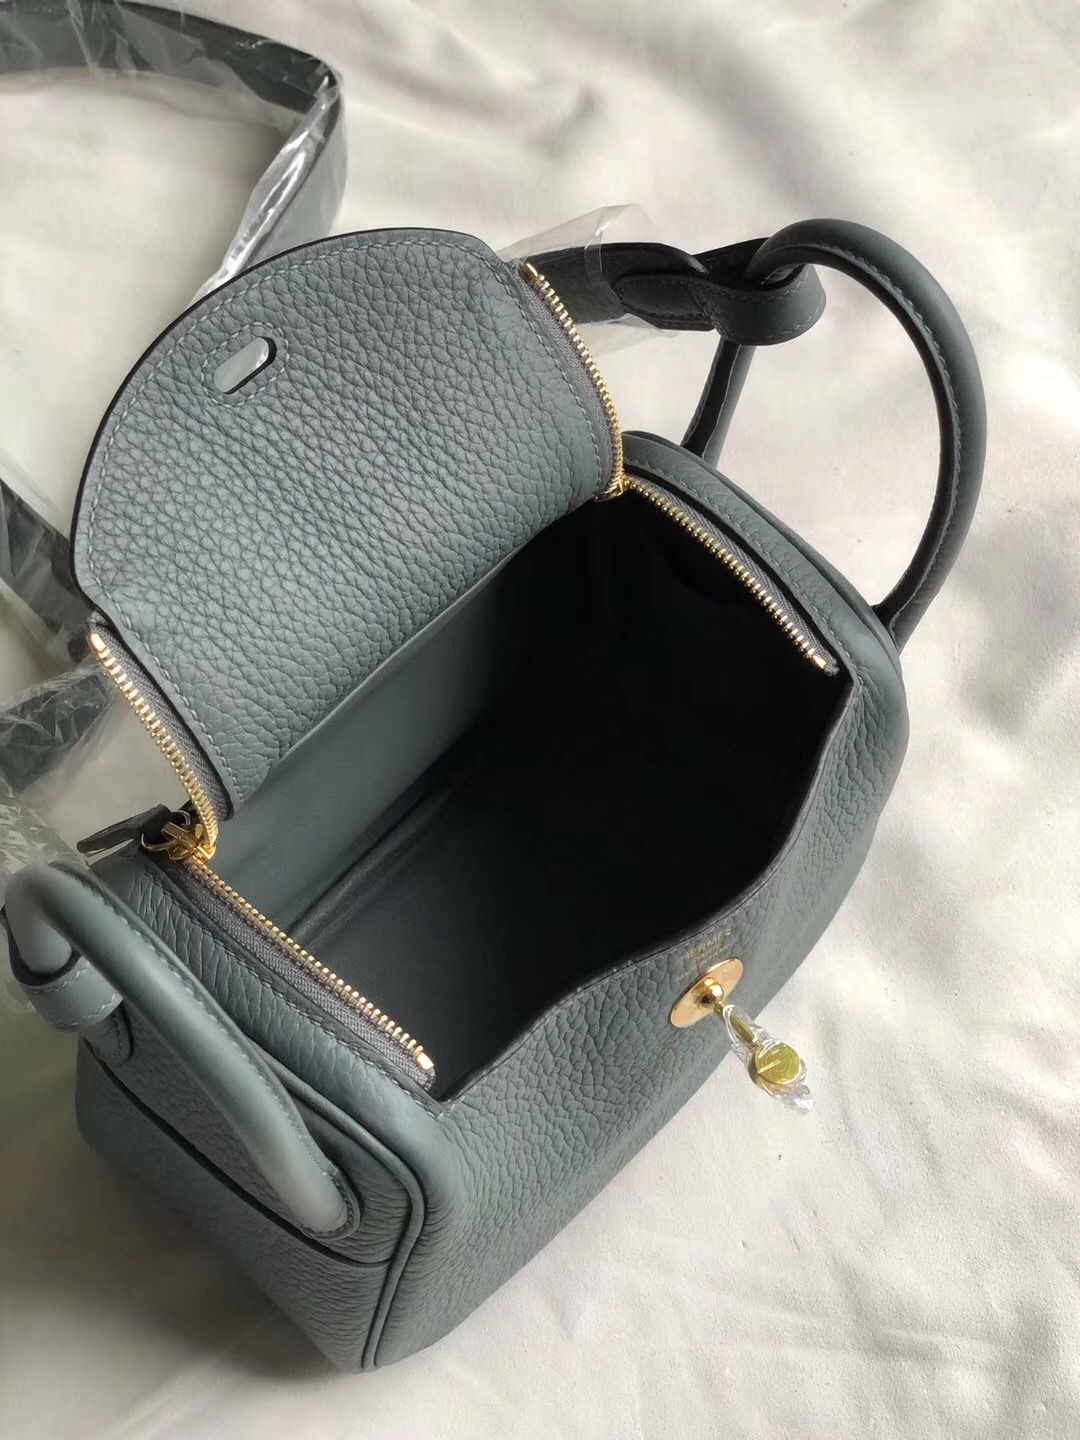 Hermes Mini Lindy Bag In Vert Amande Clemence Leather 